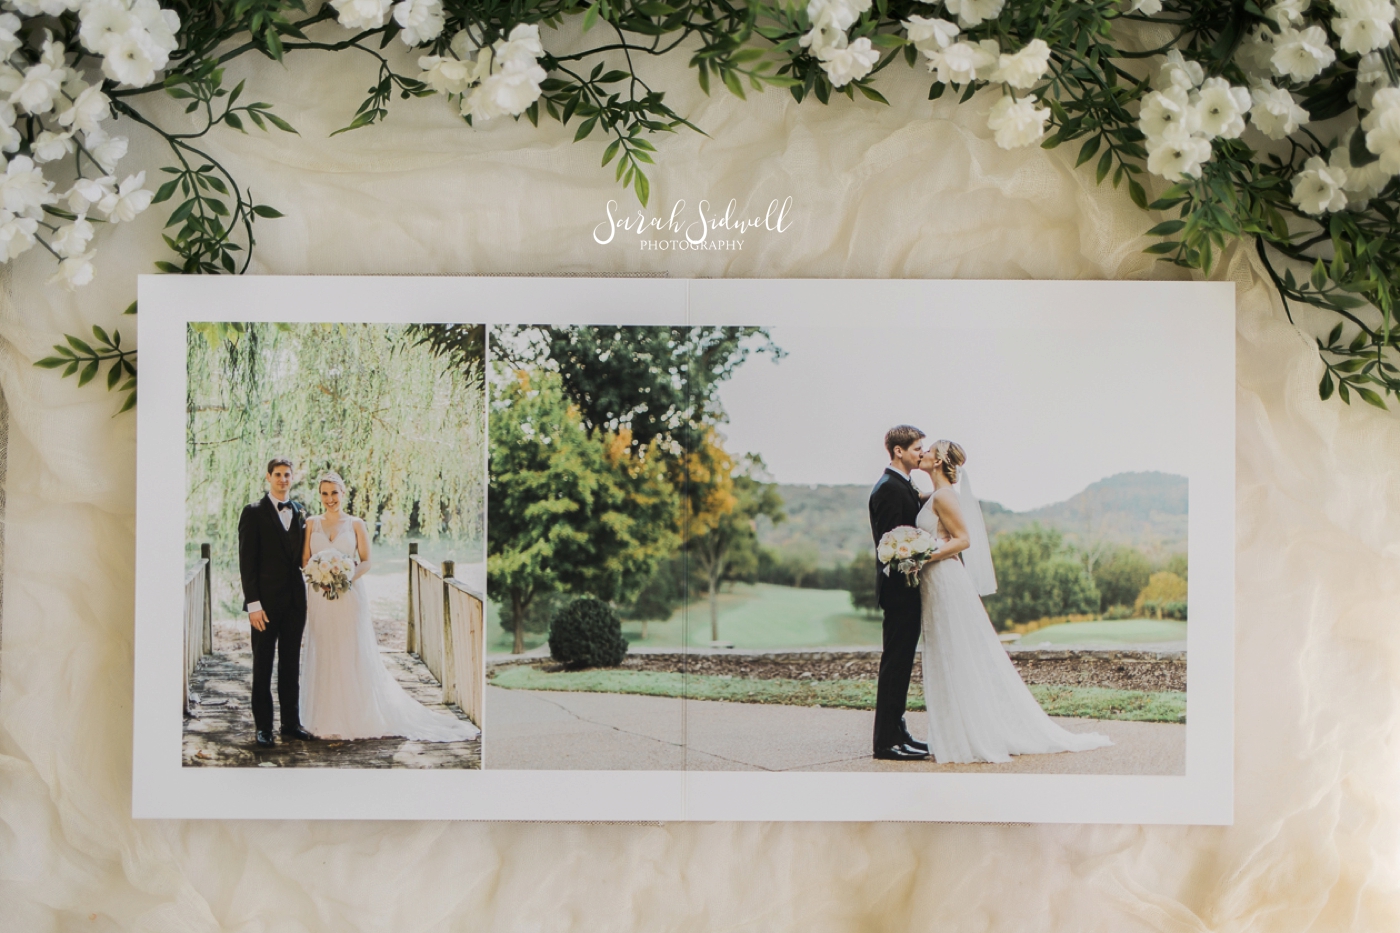 A wedding album sits on a table, opened. 